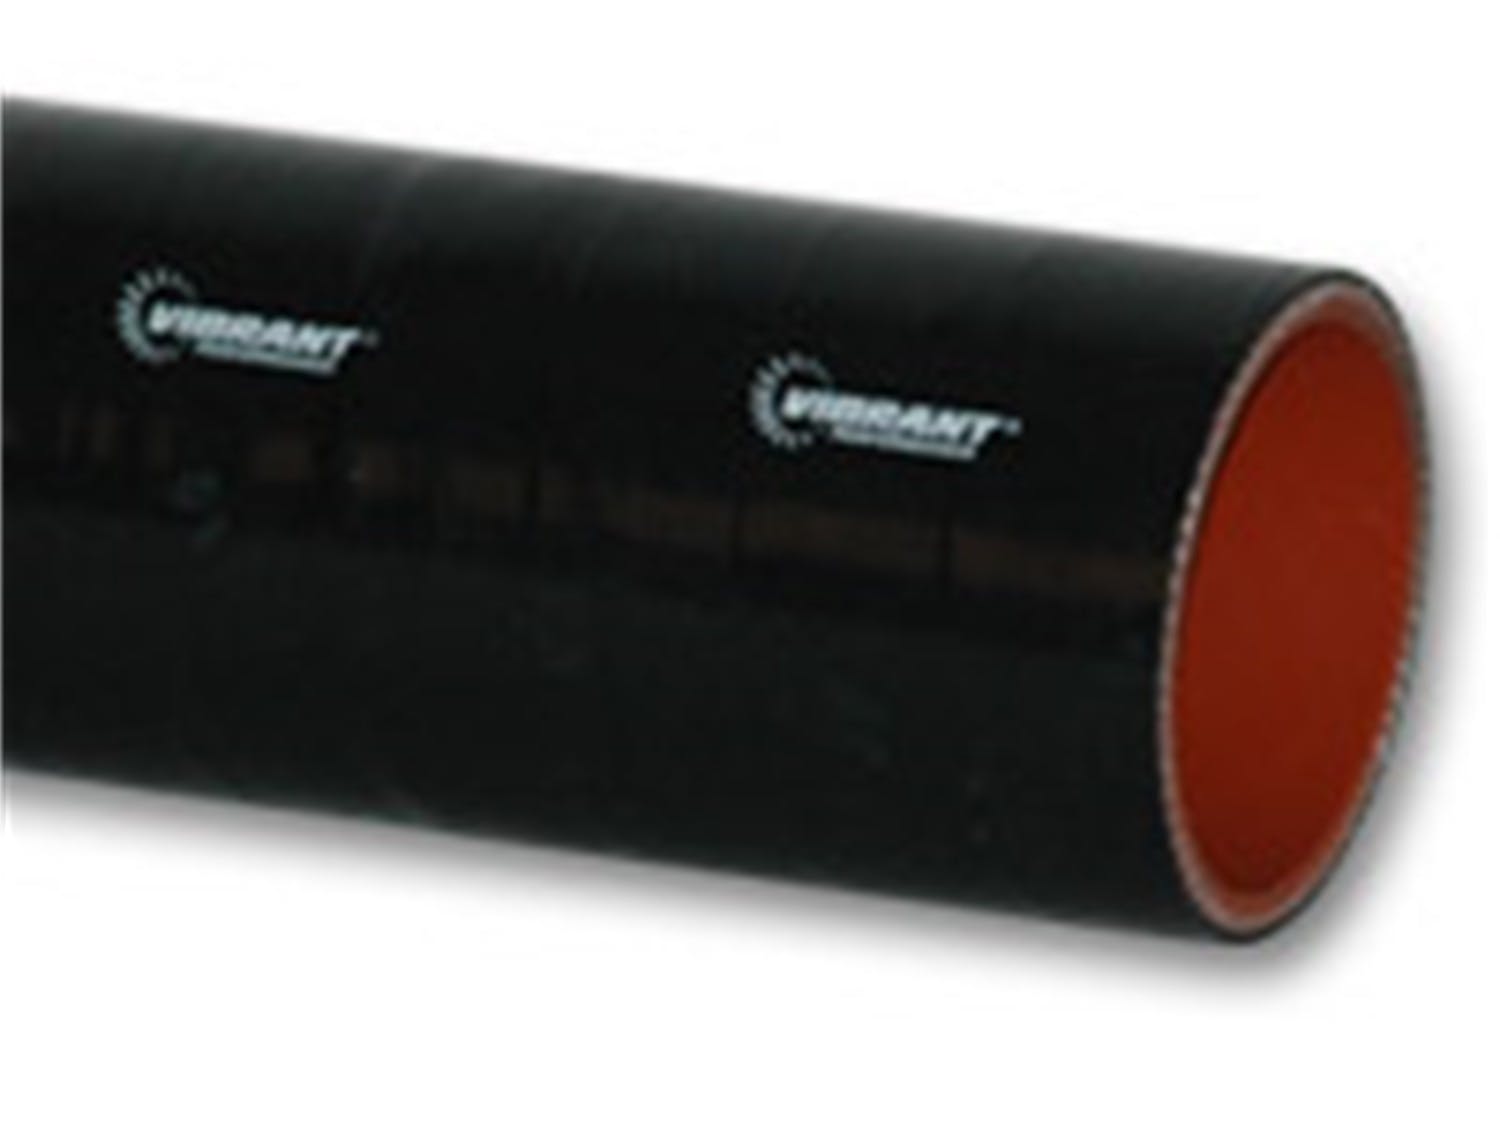 Vibrant Performance 2707 4 Ply Silicone Sleeve, 2 inch I.D. x 36 inch Long - Black